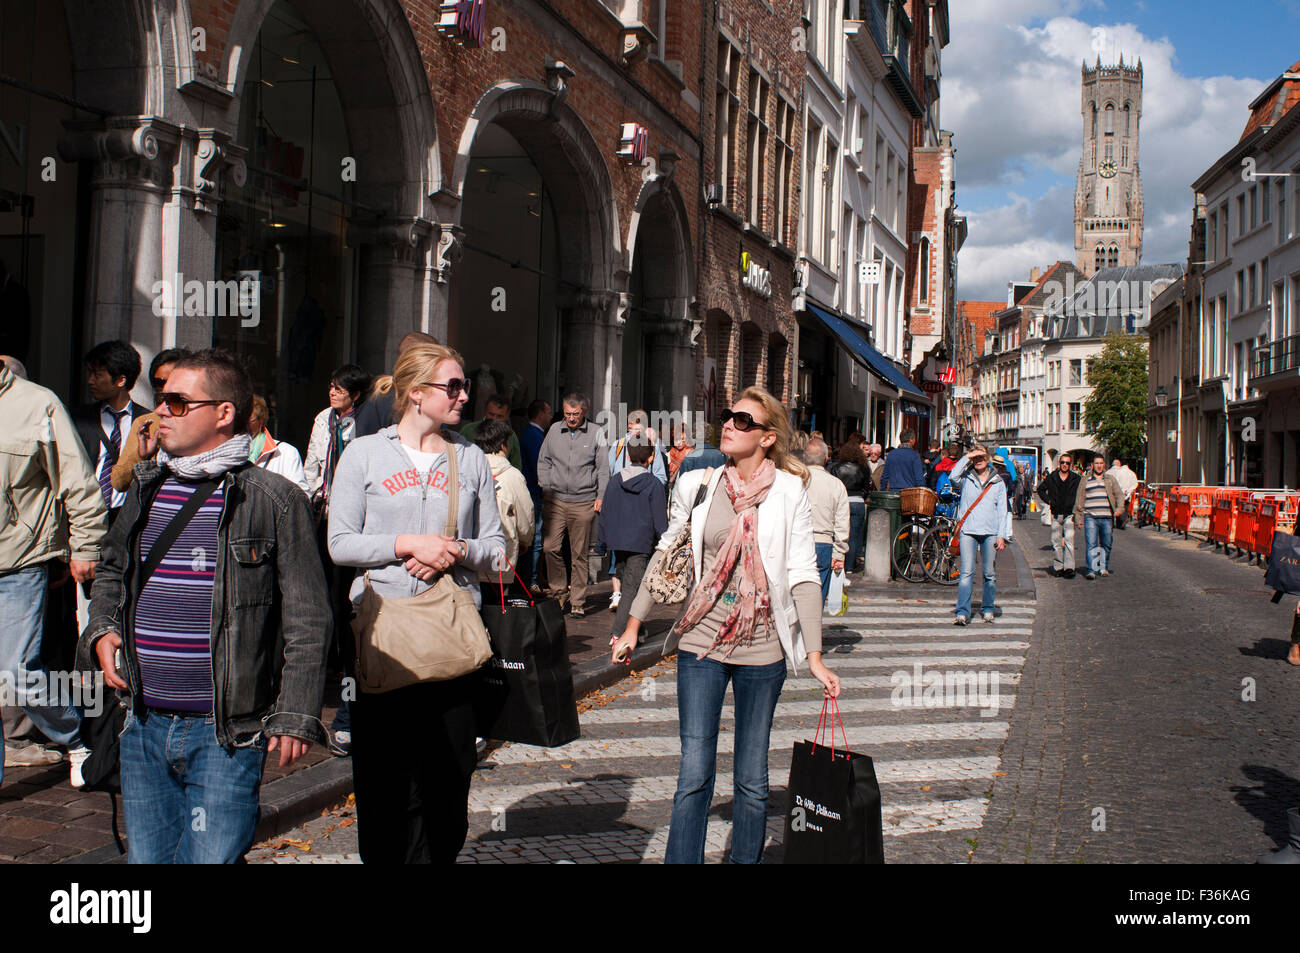 Shopping in Bruges. Bruges' main shopping areas are situated between 't Zand and Markt Square - opening hours are generally betw Stock Photo